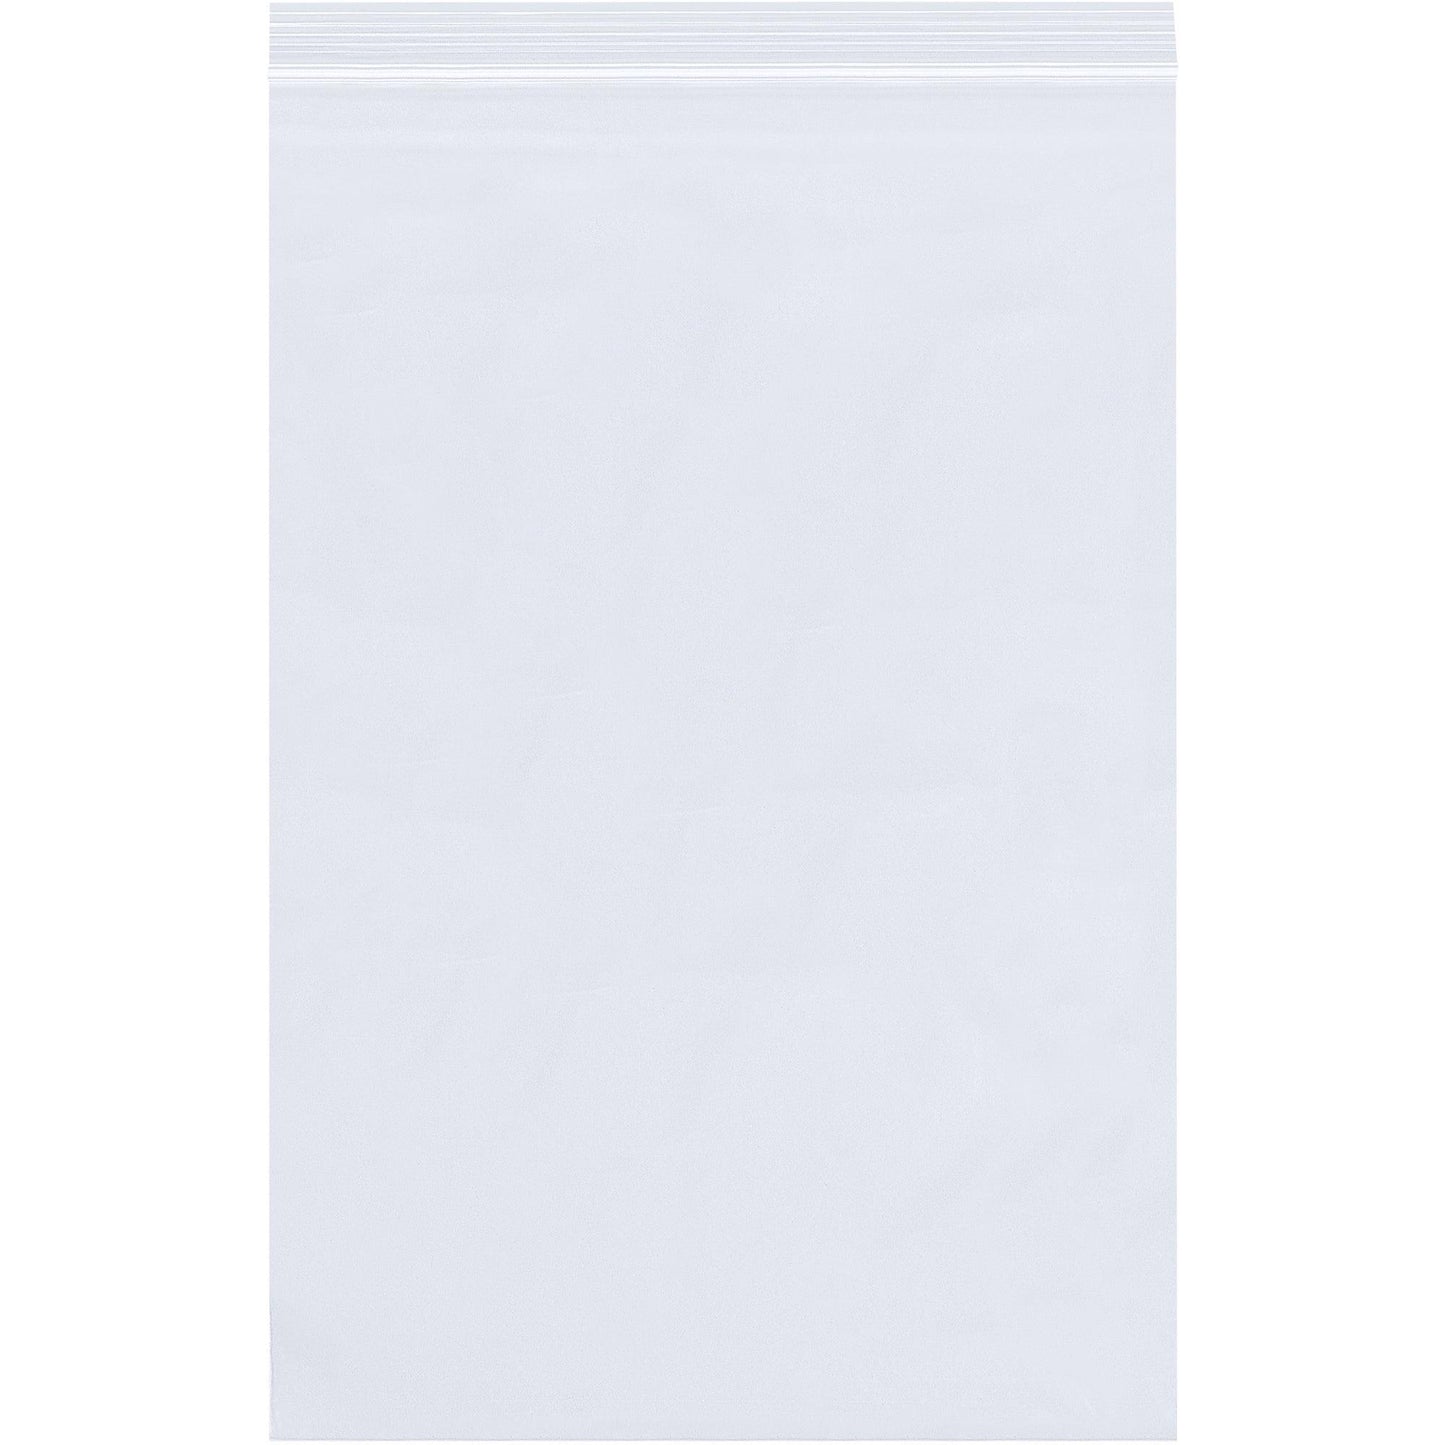 4 x 14" - 2 Mil Reclosable Poly Bags - PB3763